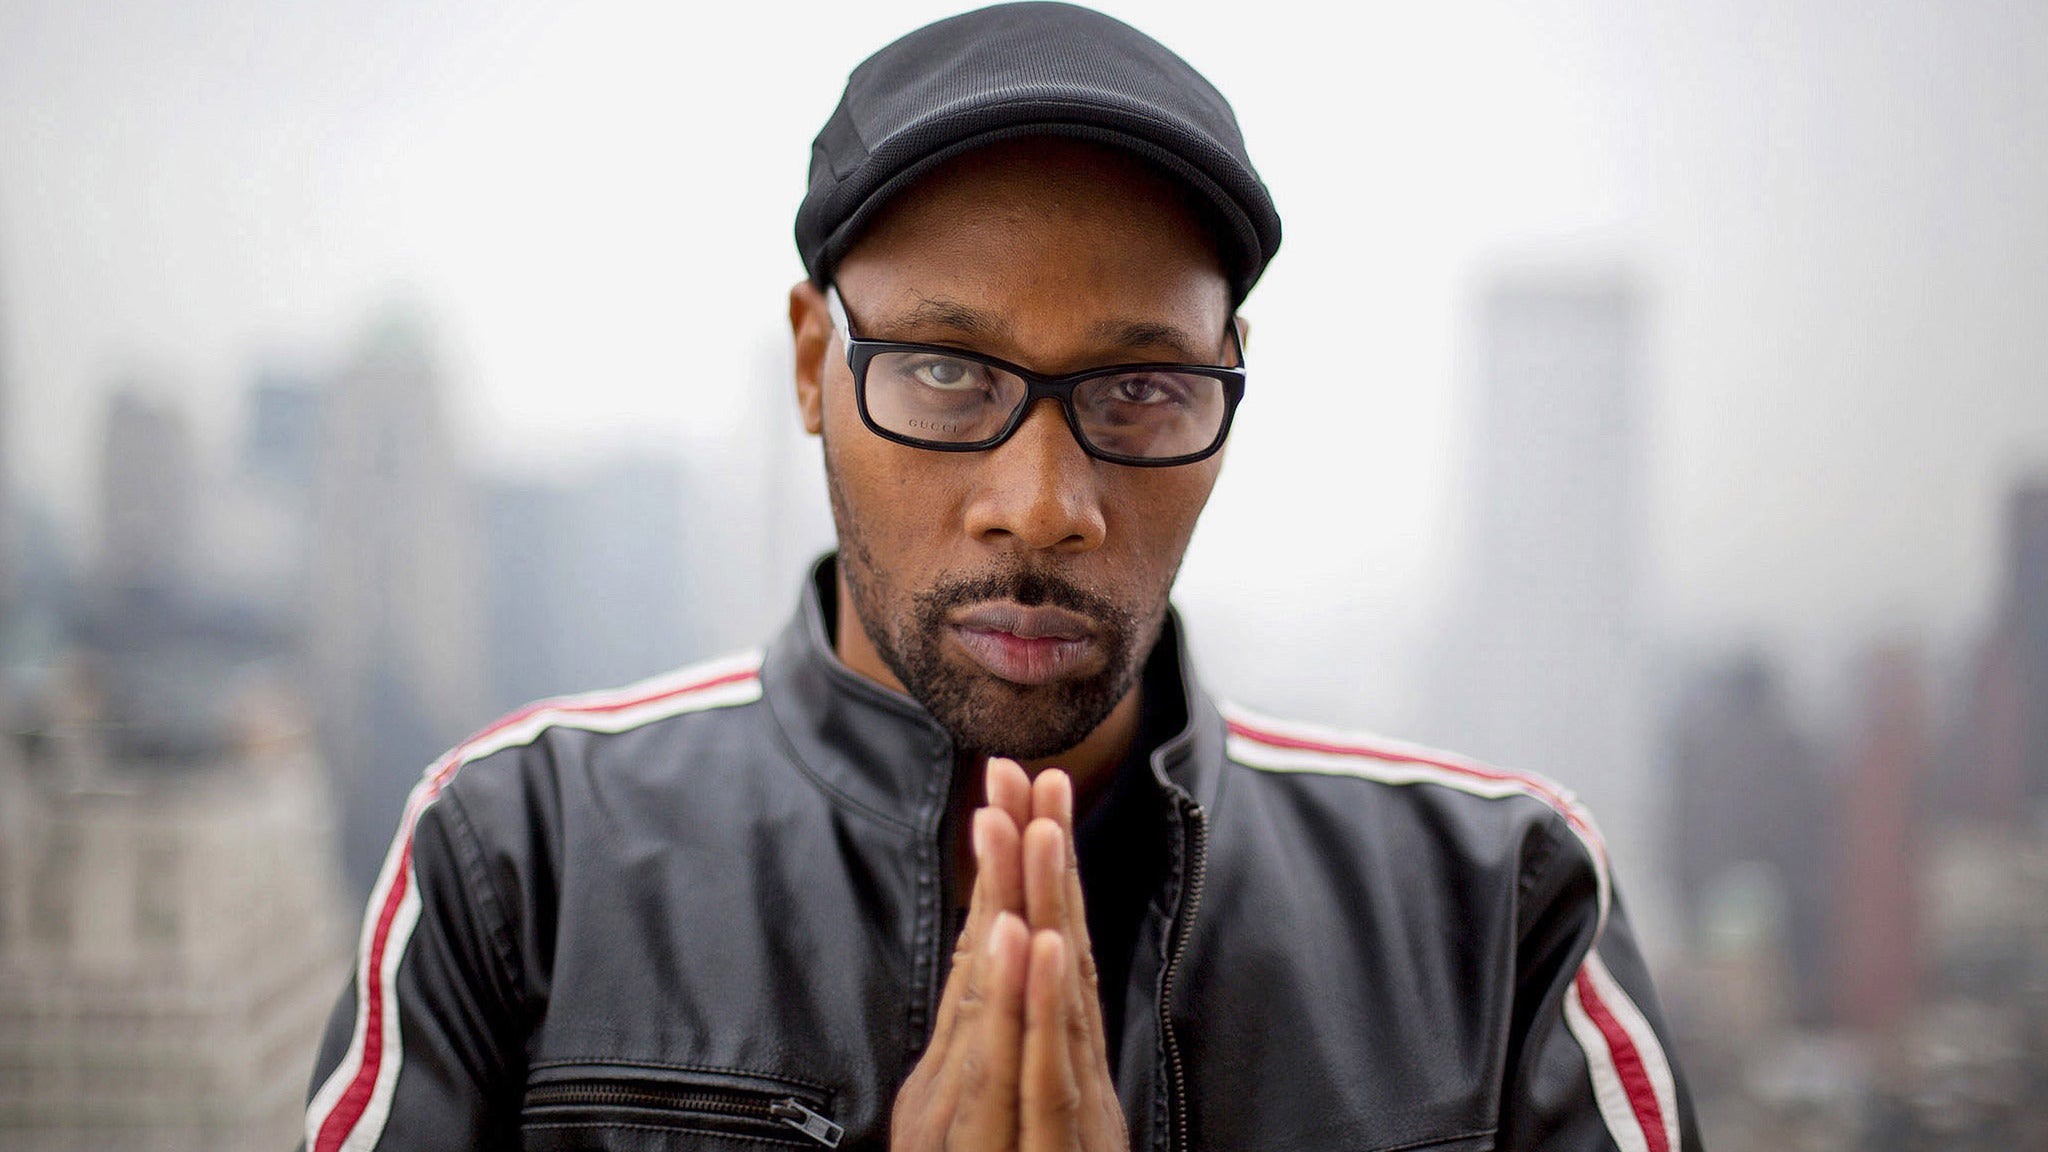 RZA - The 36 Chambers 30th Anniversary Celebration in New York promo photo for Artist presale offer code